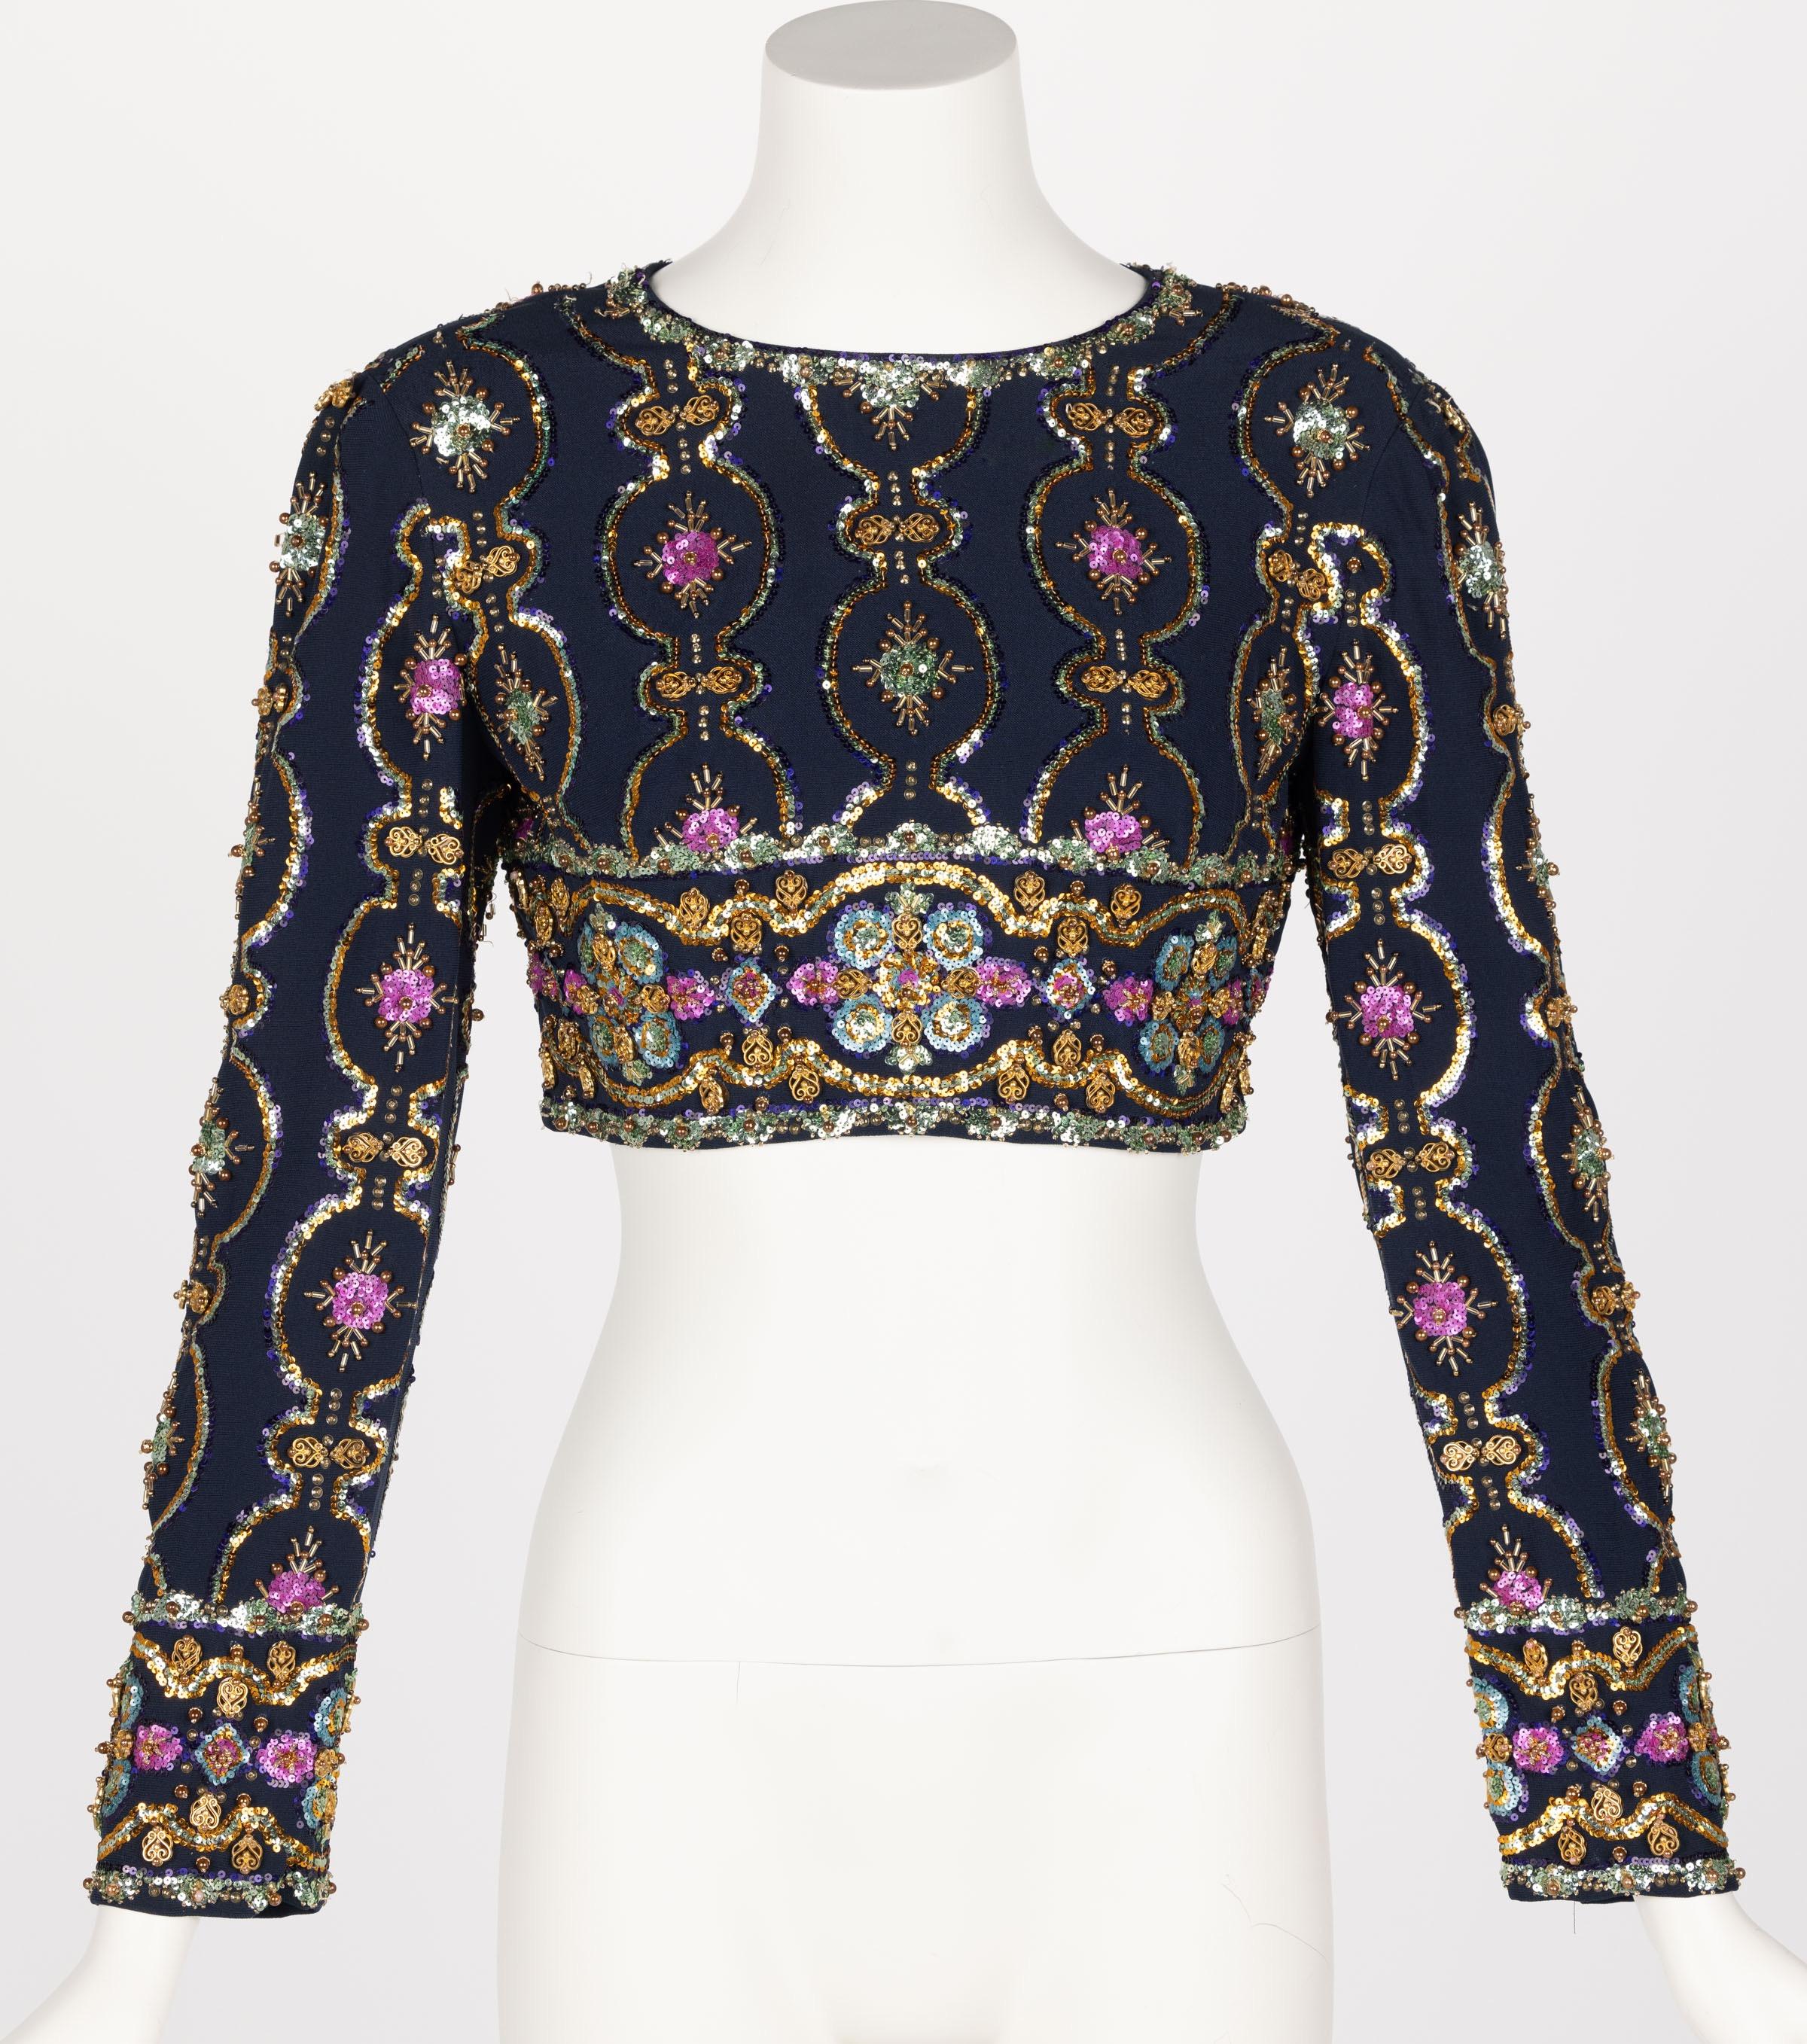 This top was  Designed by Jules-Francois Crahay, who headed the Lanvin ateliers from 1964-1984.  Crahay designed for women in the grand couture tradition, where the lavishness of fabrics and design was practically unlimited.
Done in what feels like